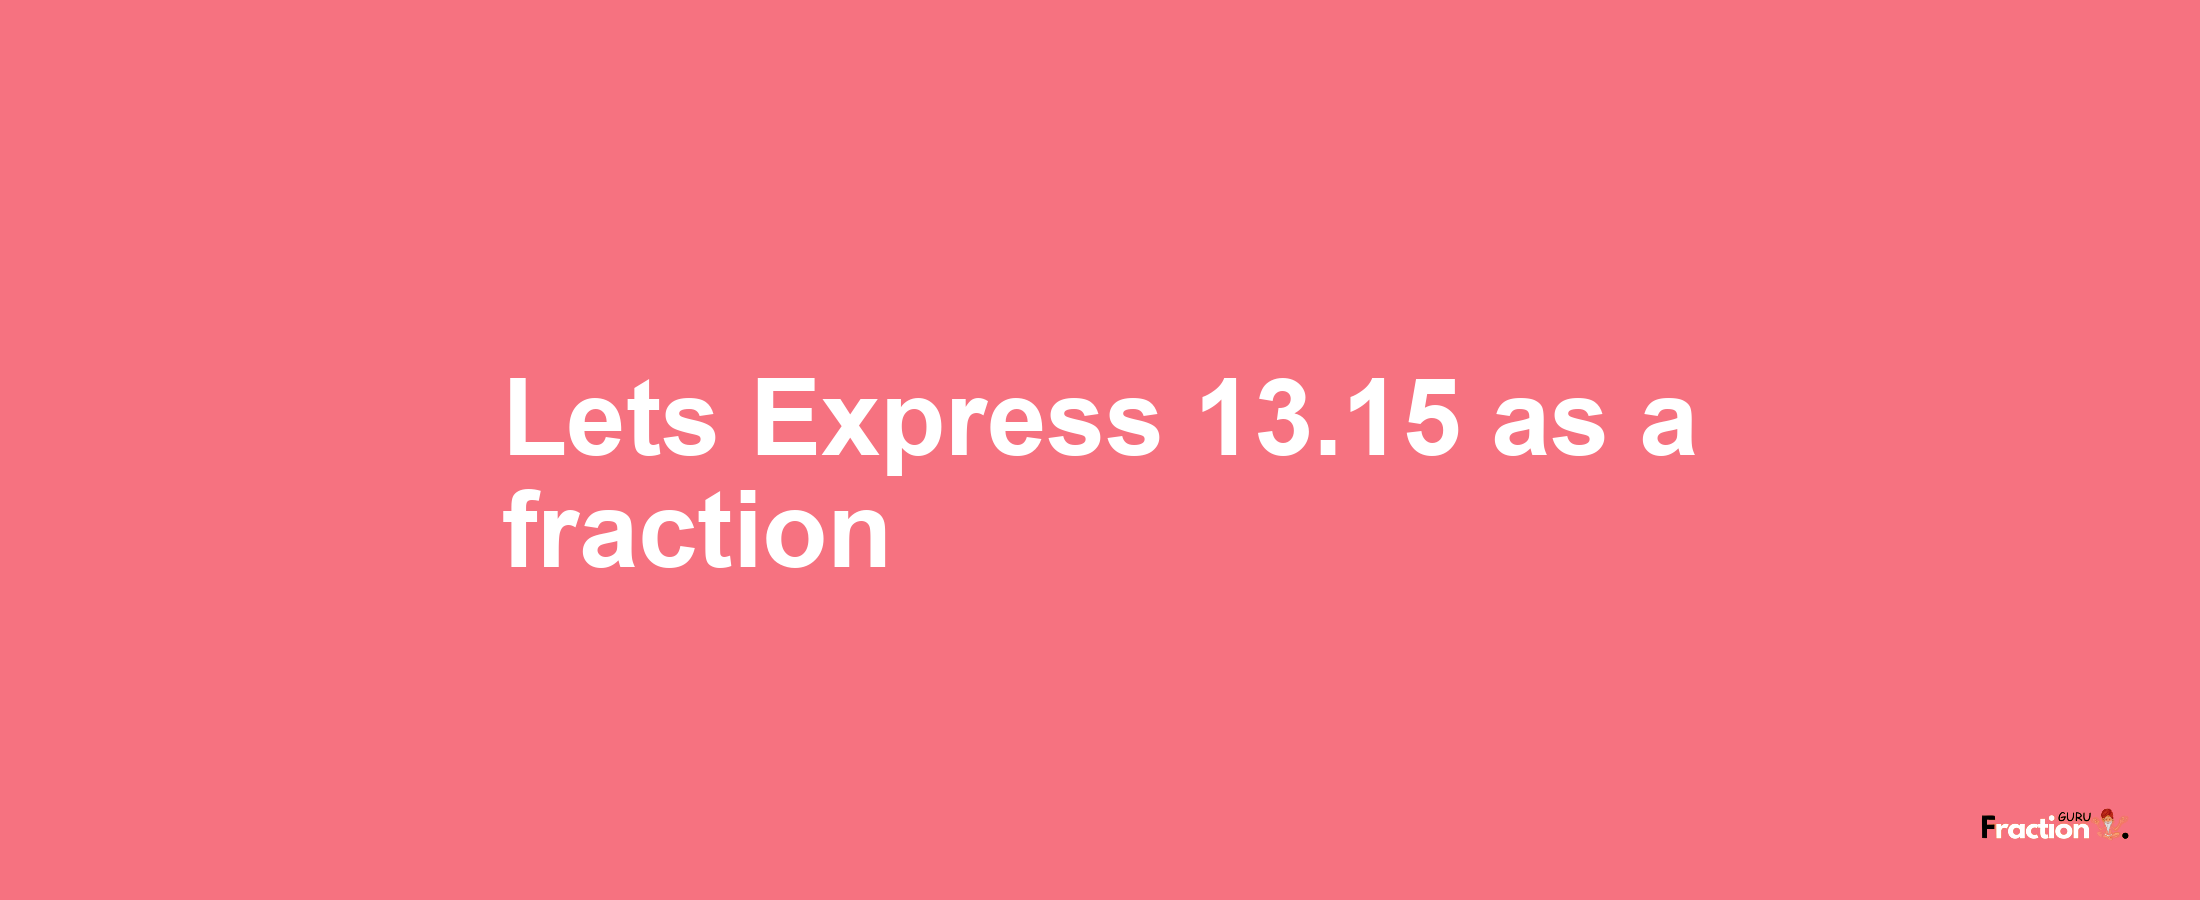 Lets Express 13.15 as afraction